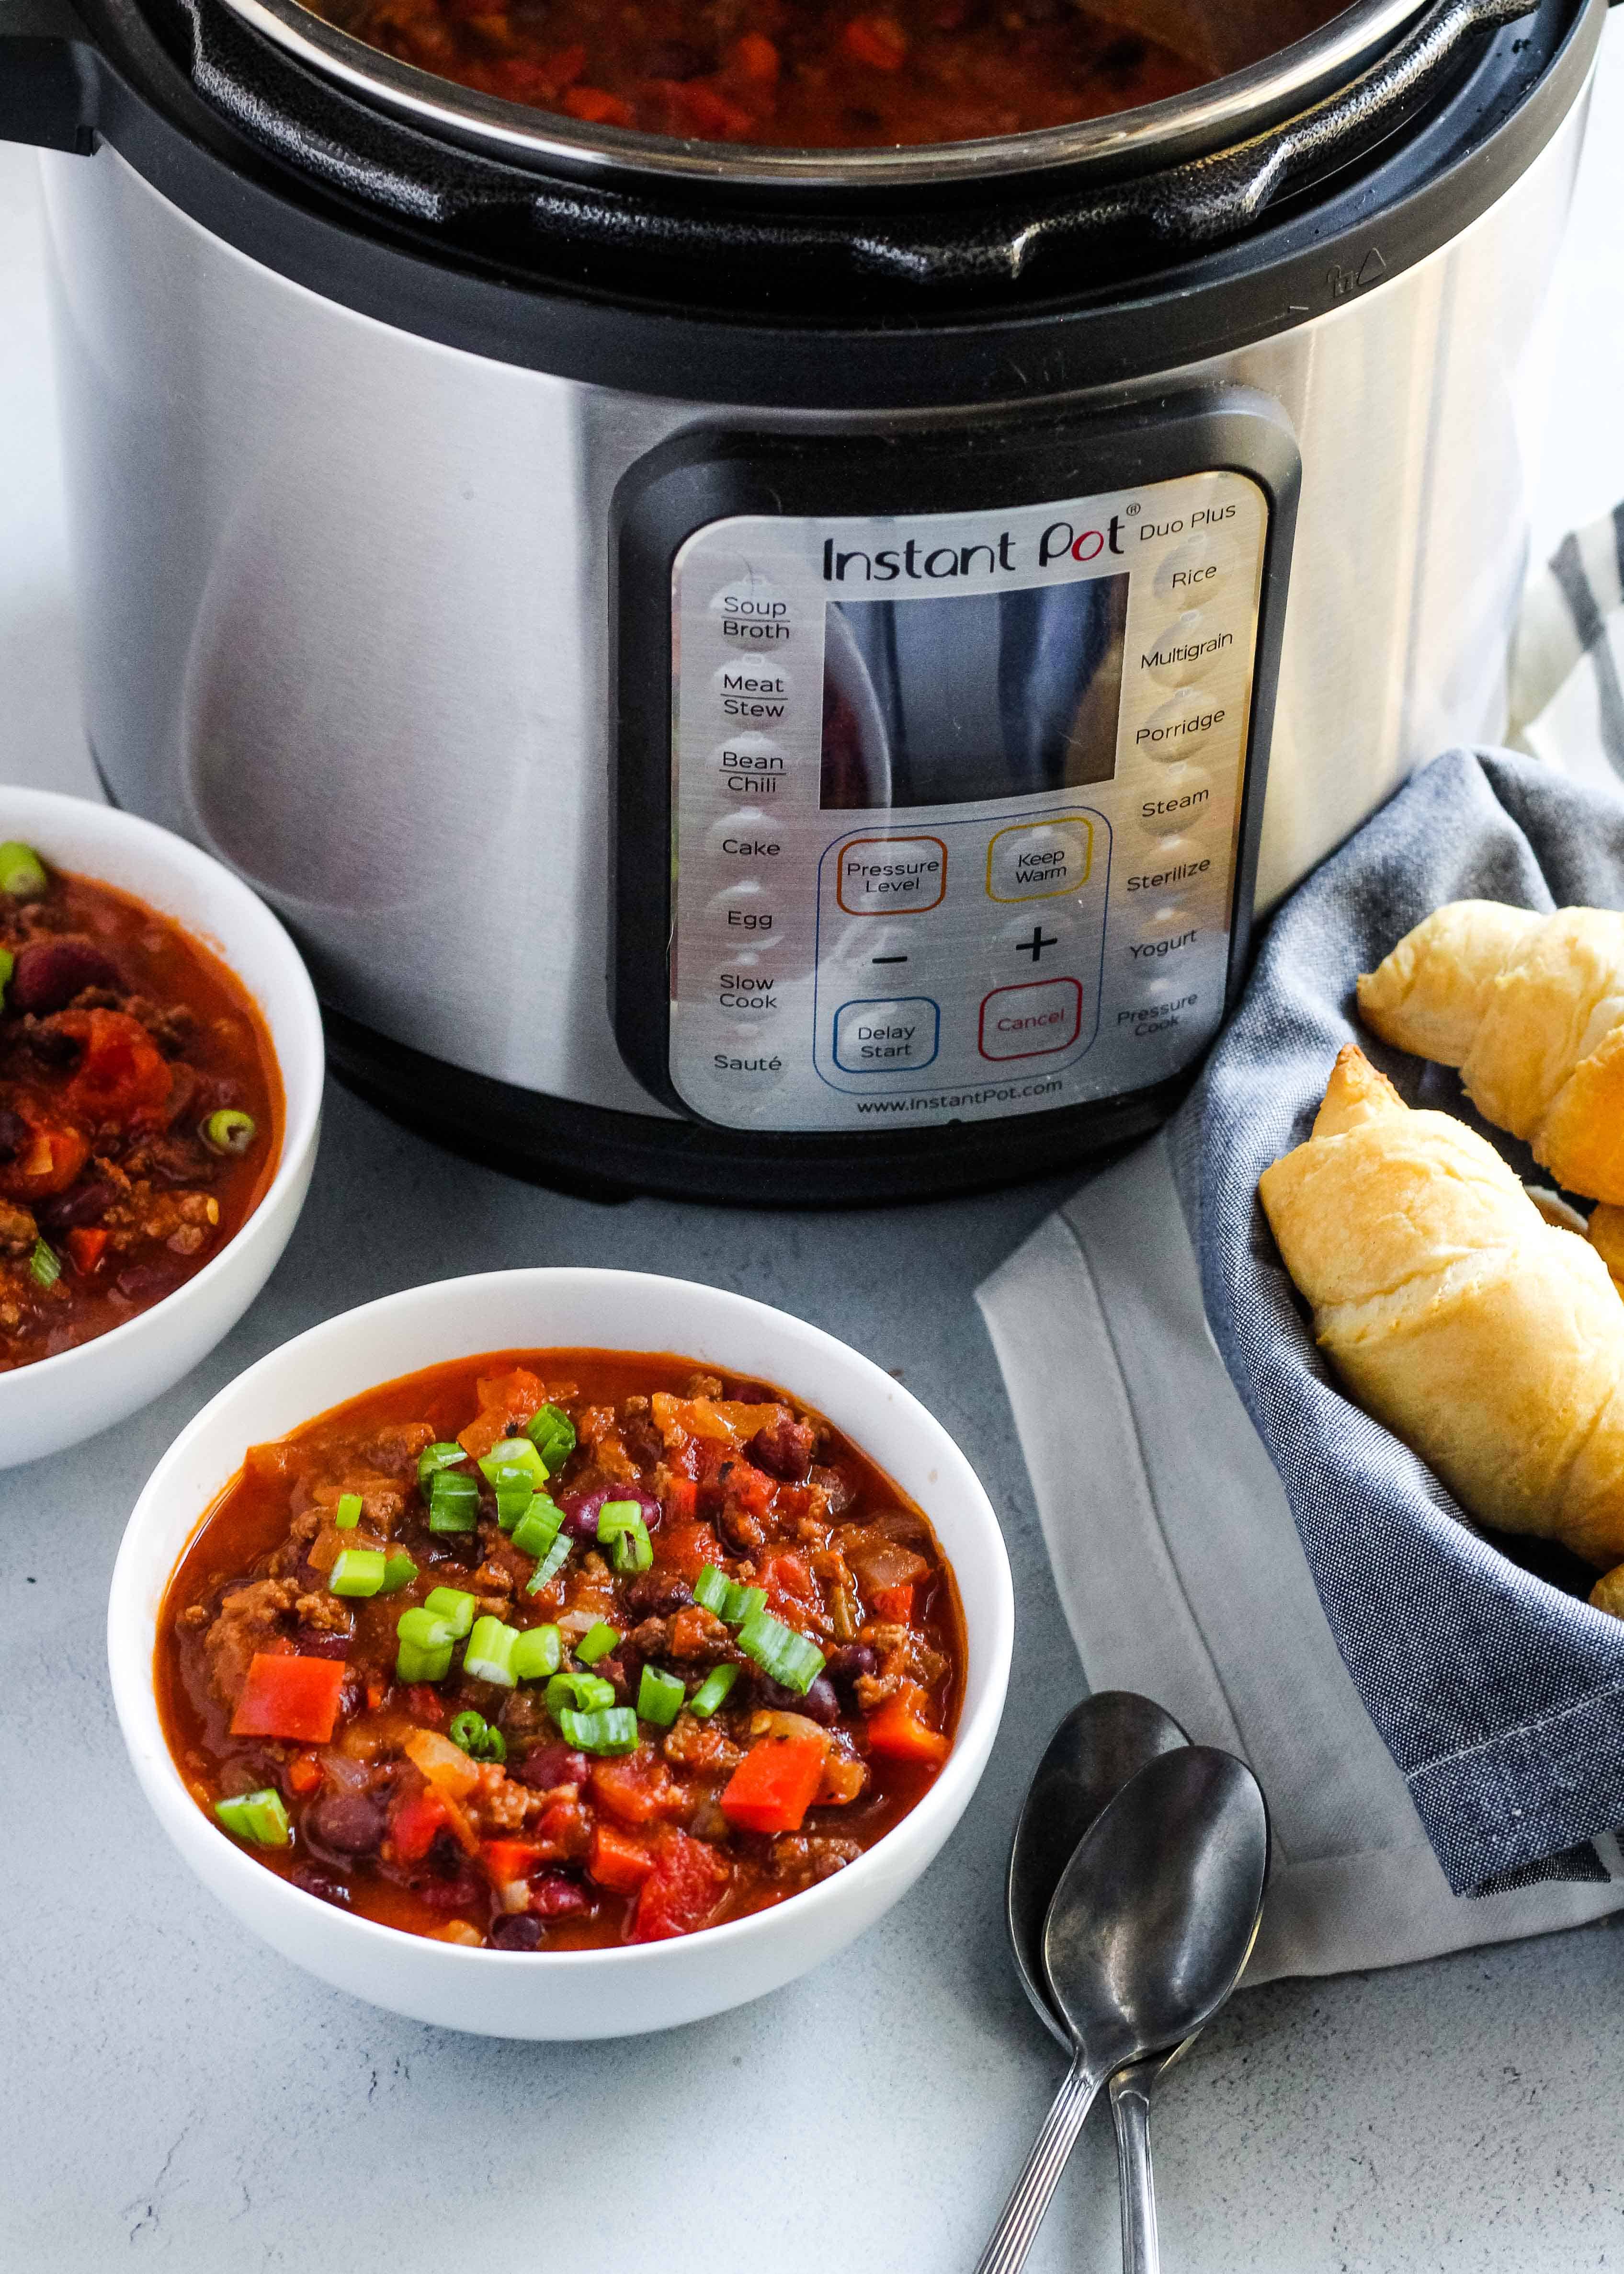 Make this easy Classic Instant Pot Chili recipe. Learn how easy it is to make chili in an instant pot with pantry ingredients you already have | Street Smart Nutrition